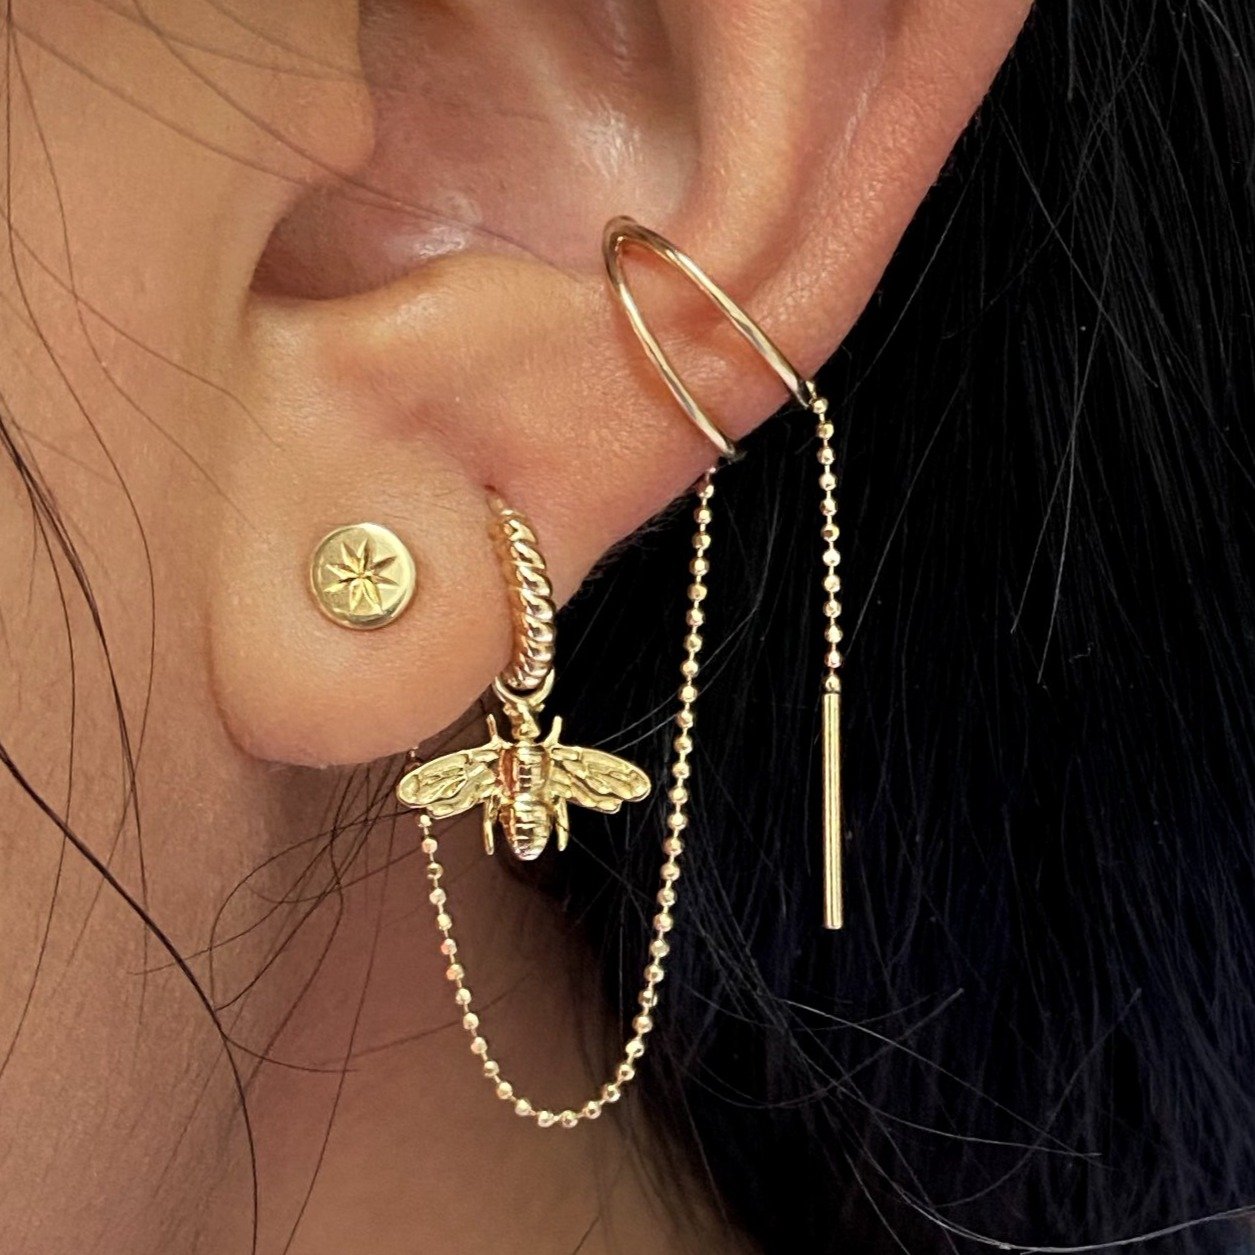 Close up view of a model's ear wearing, a yellow gold Bee Charm on a Rope Huggie Hoop and various Automic Gold earrings